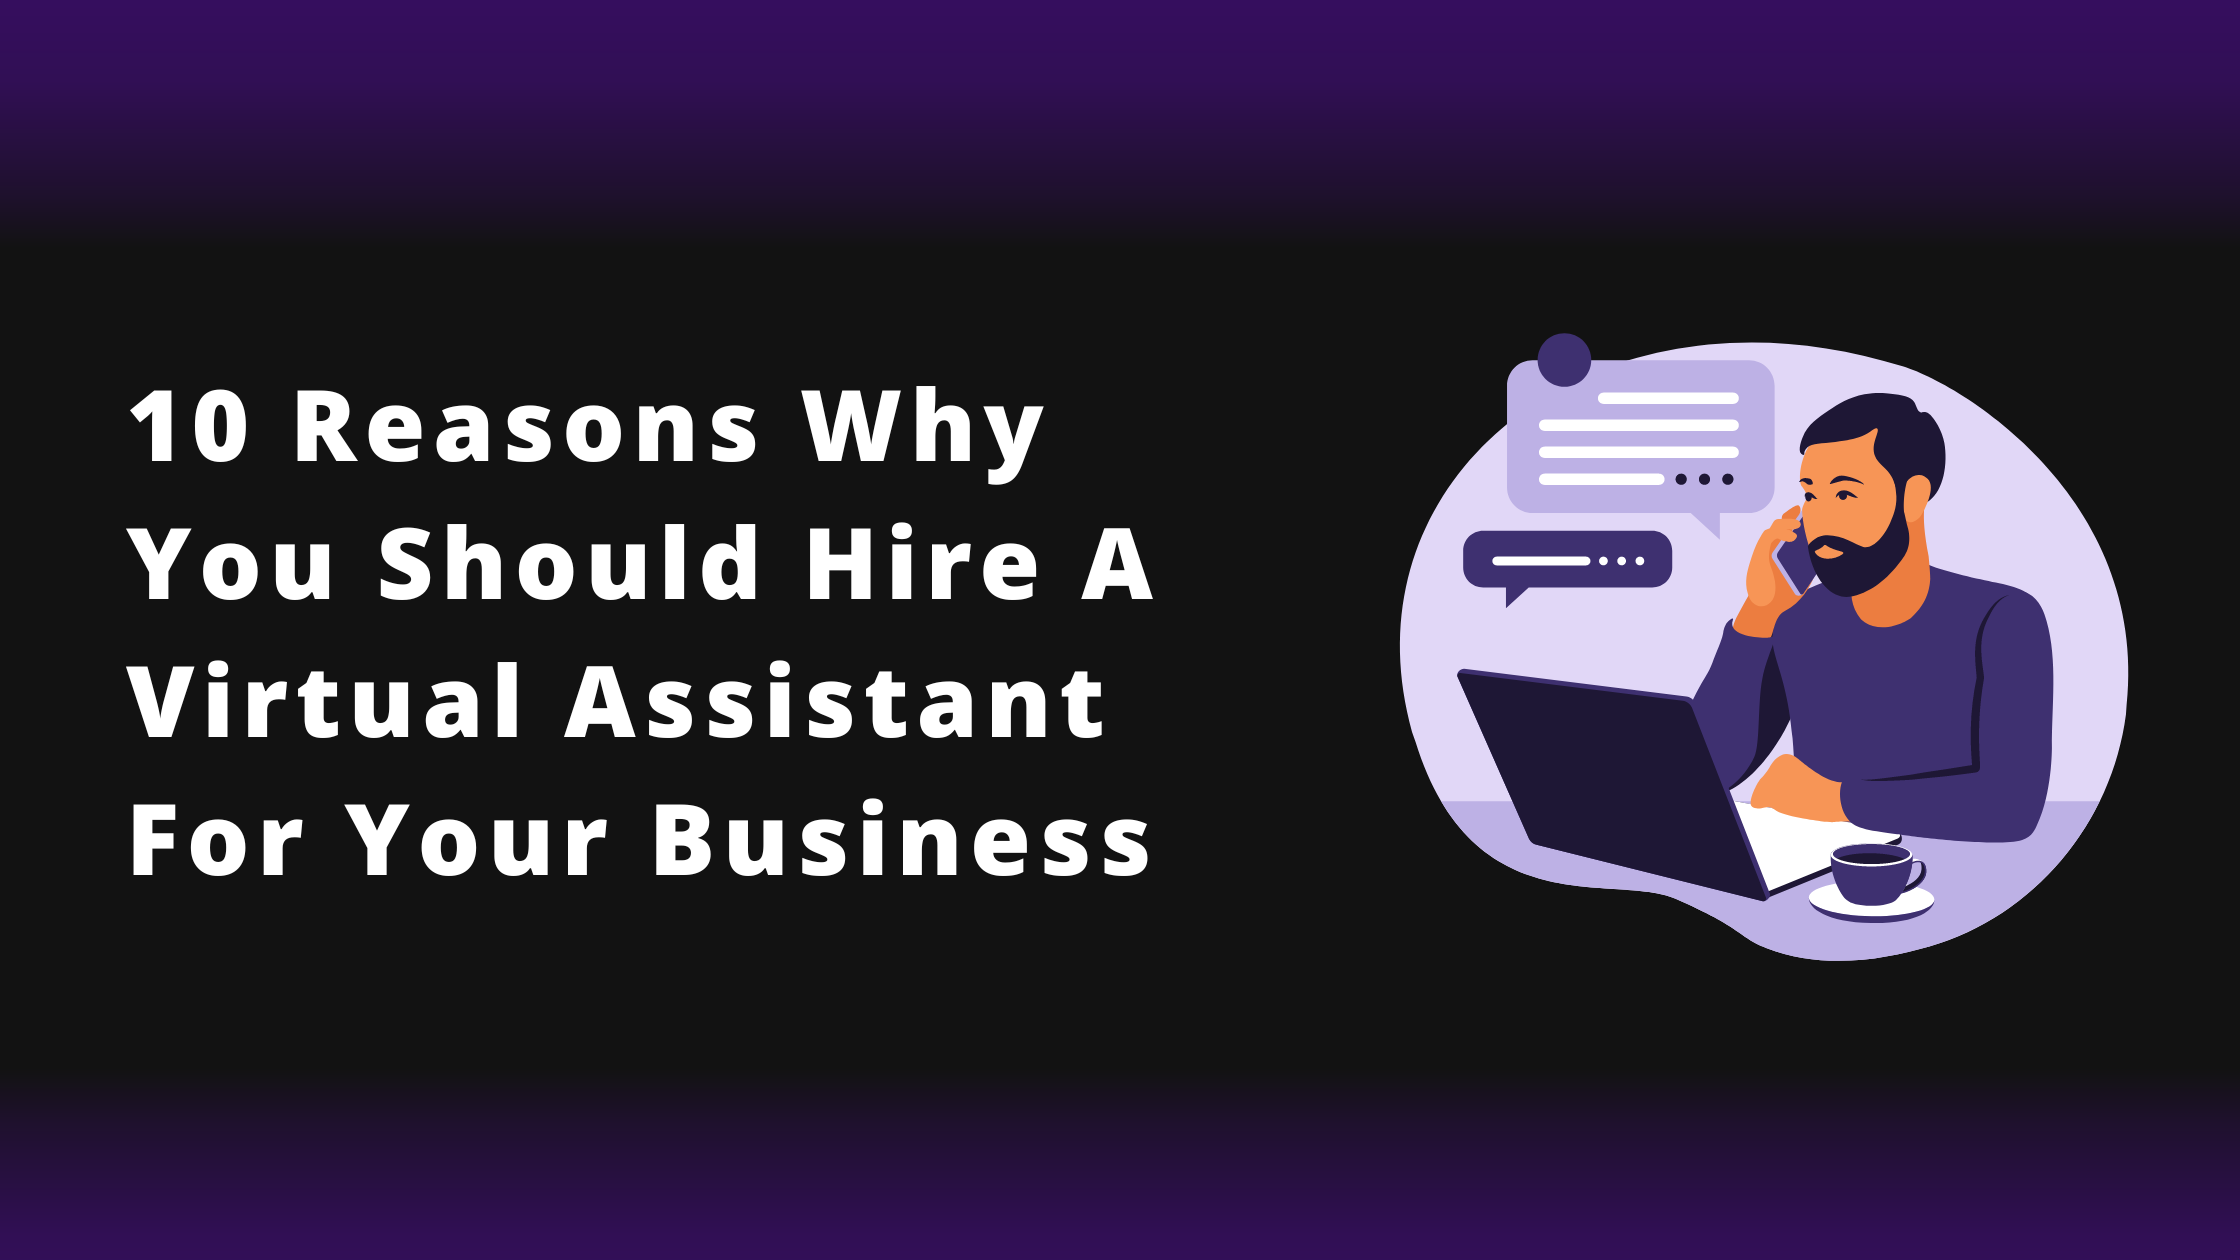 10 reasons Why You Should Hire A Virtual Assistant For Your Business Right Away